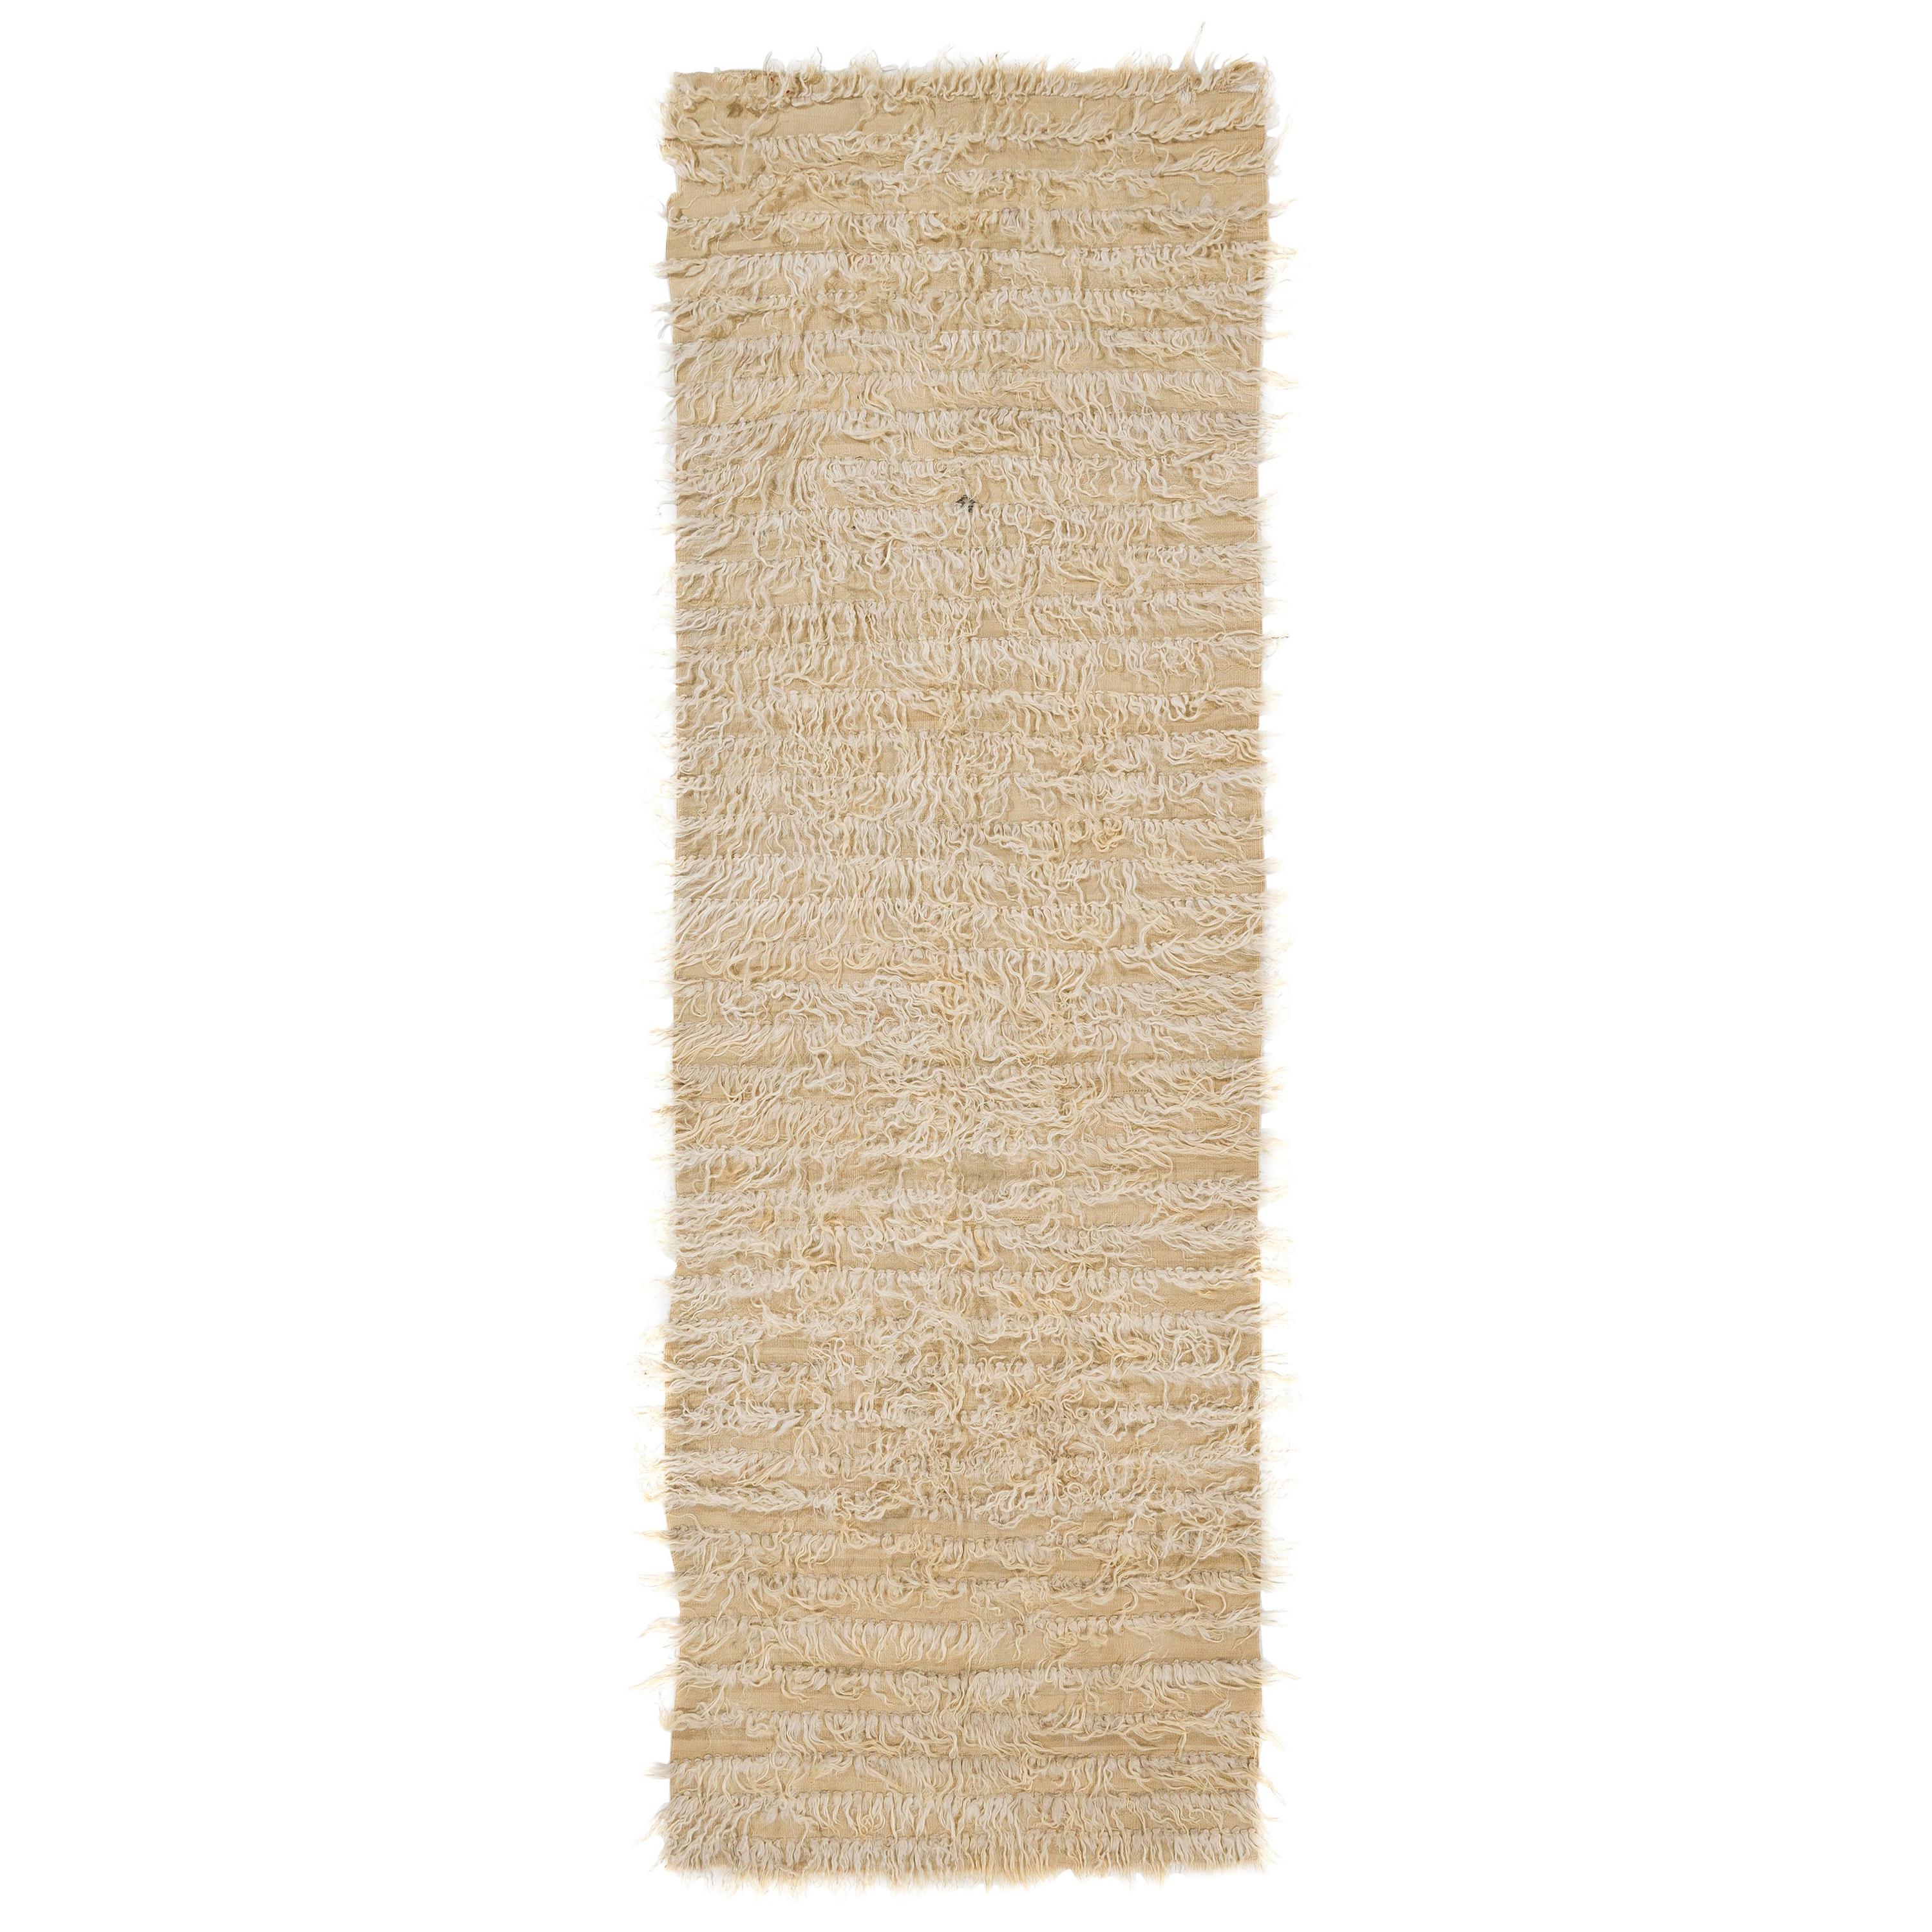 3.7x10.9 Ft Vintage Plain Cream Tulu Rug. 100% Natural Undyed Mohair Wool Runner For Sale